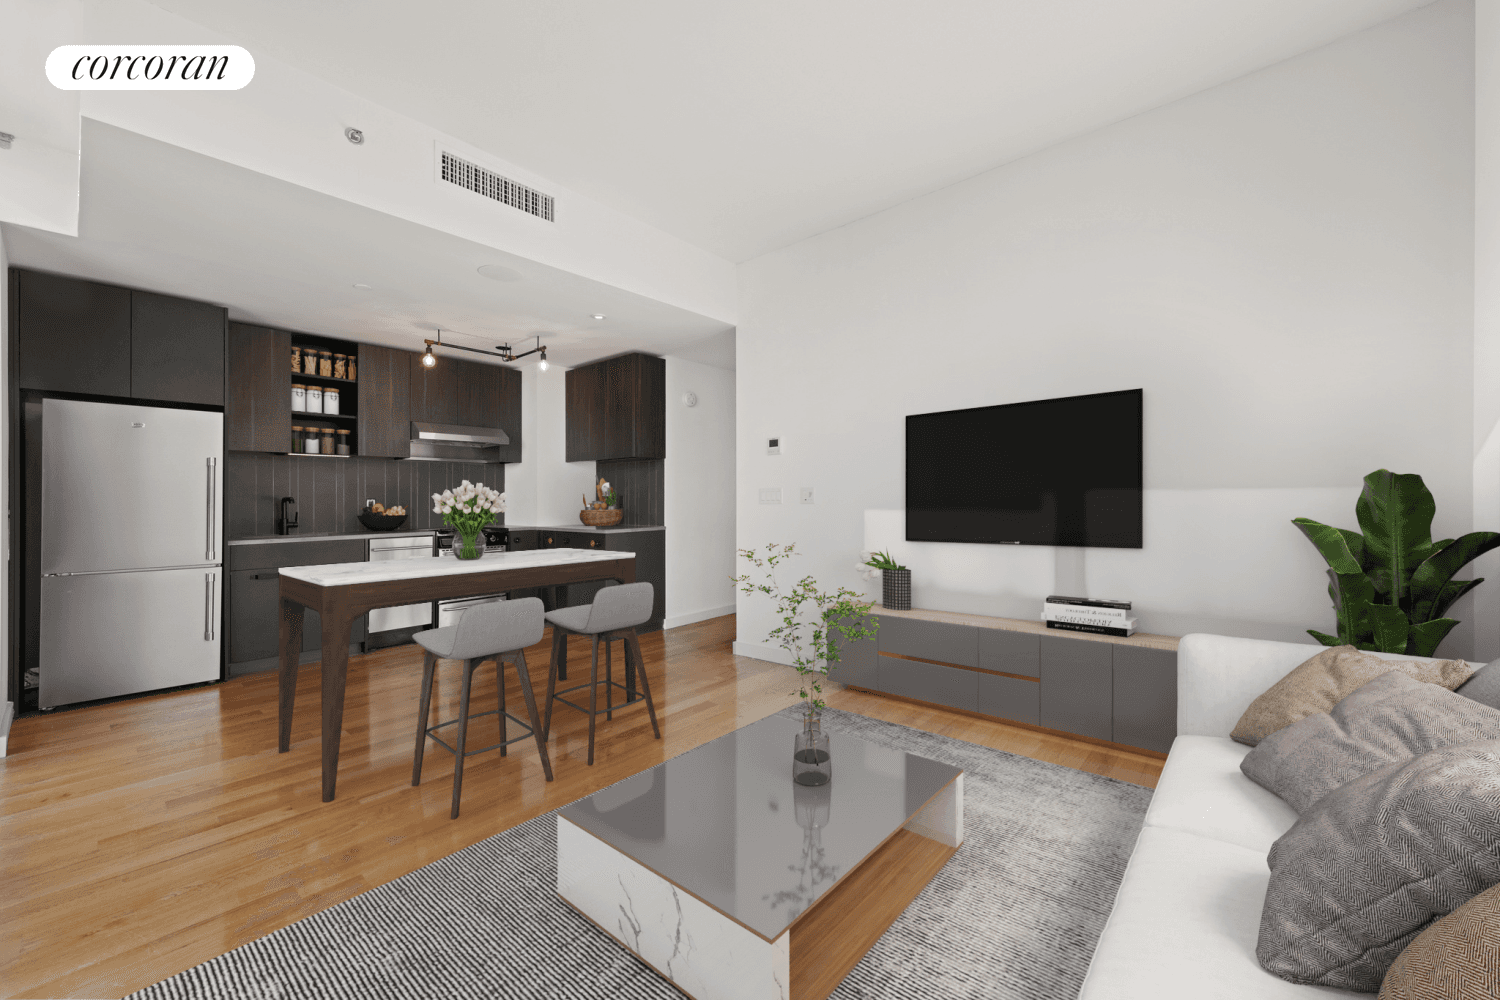 RENT STABILIZED ! BRAND NEW SUPERMARKET, NOW ONSITEThe interior aesthetics of Bushwick apartments vary, allowing for diverse spaces that create a sense of both local and international style.